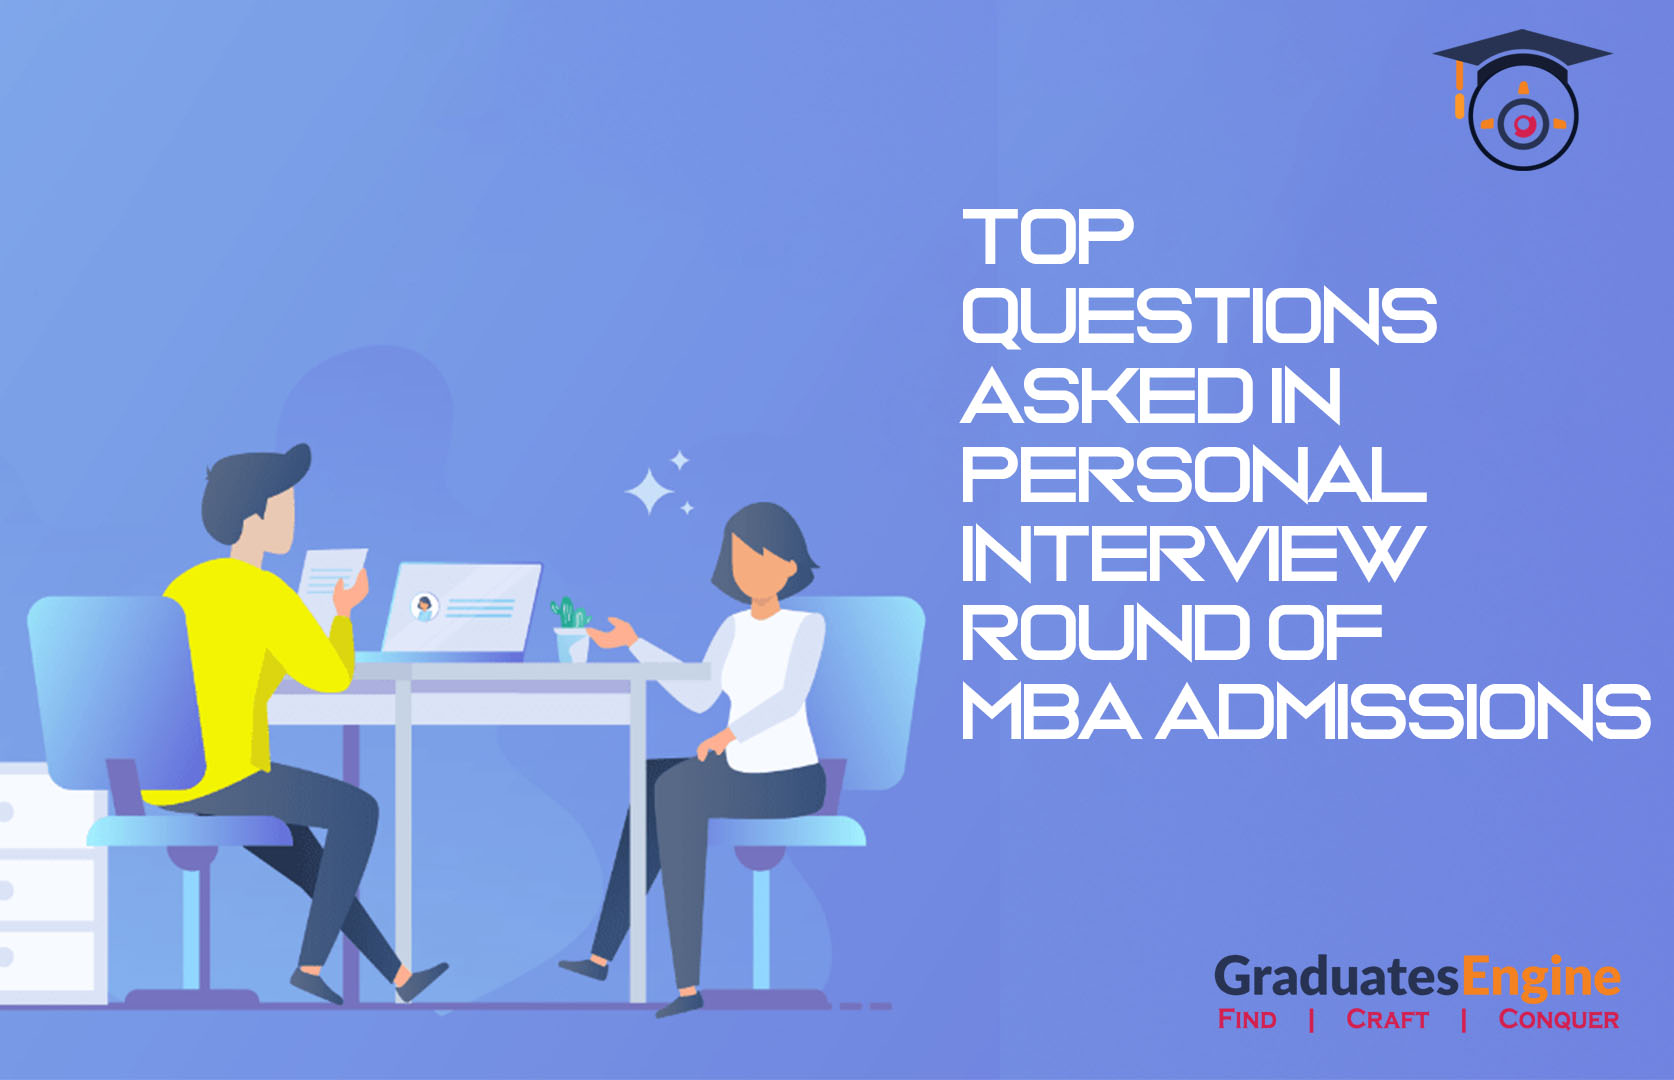 Top Questions Asked In Personal Interview Round Of MBA Admissions